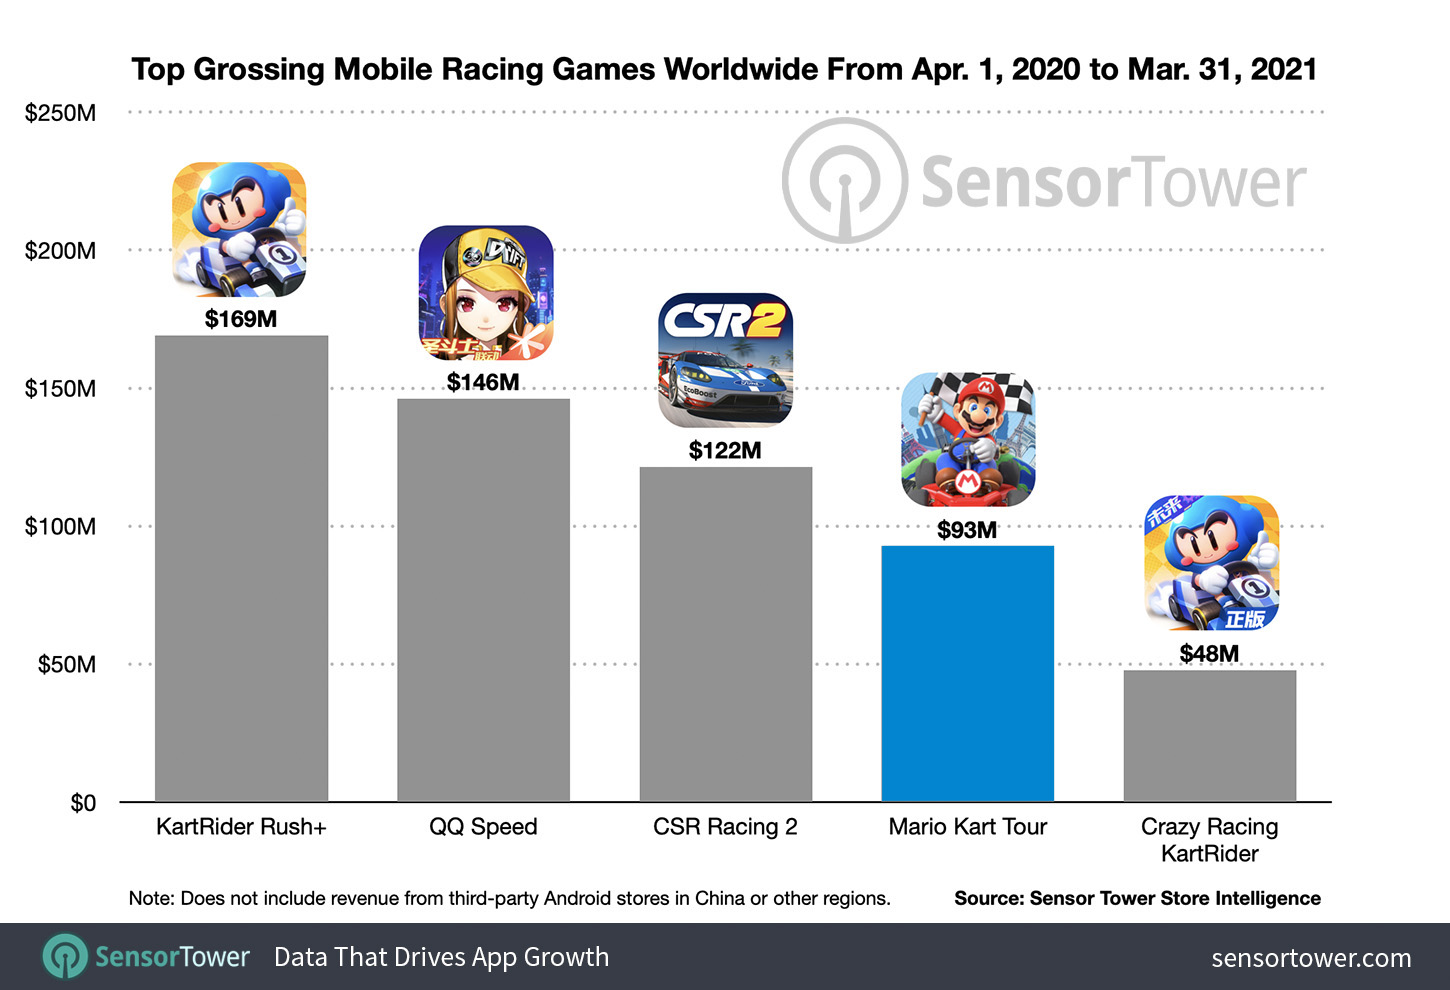 Top Grossing Mobile Racing Games in the United States from April 1, 2020 to March 31, 2021